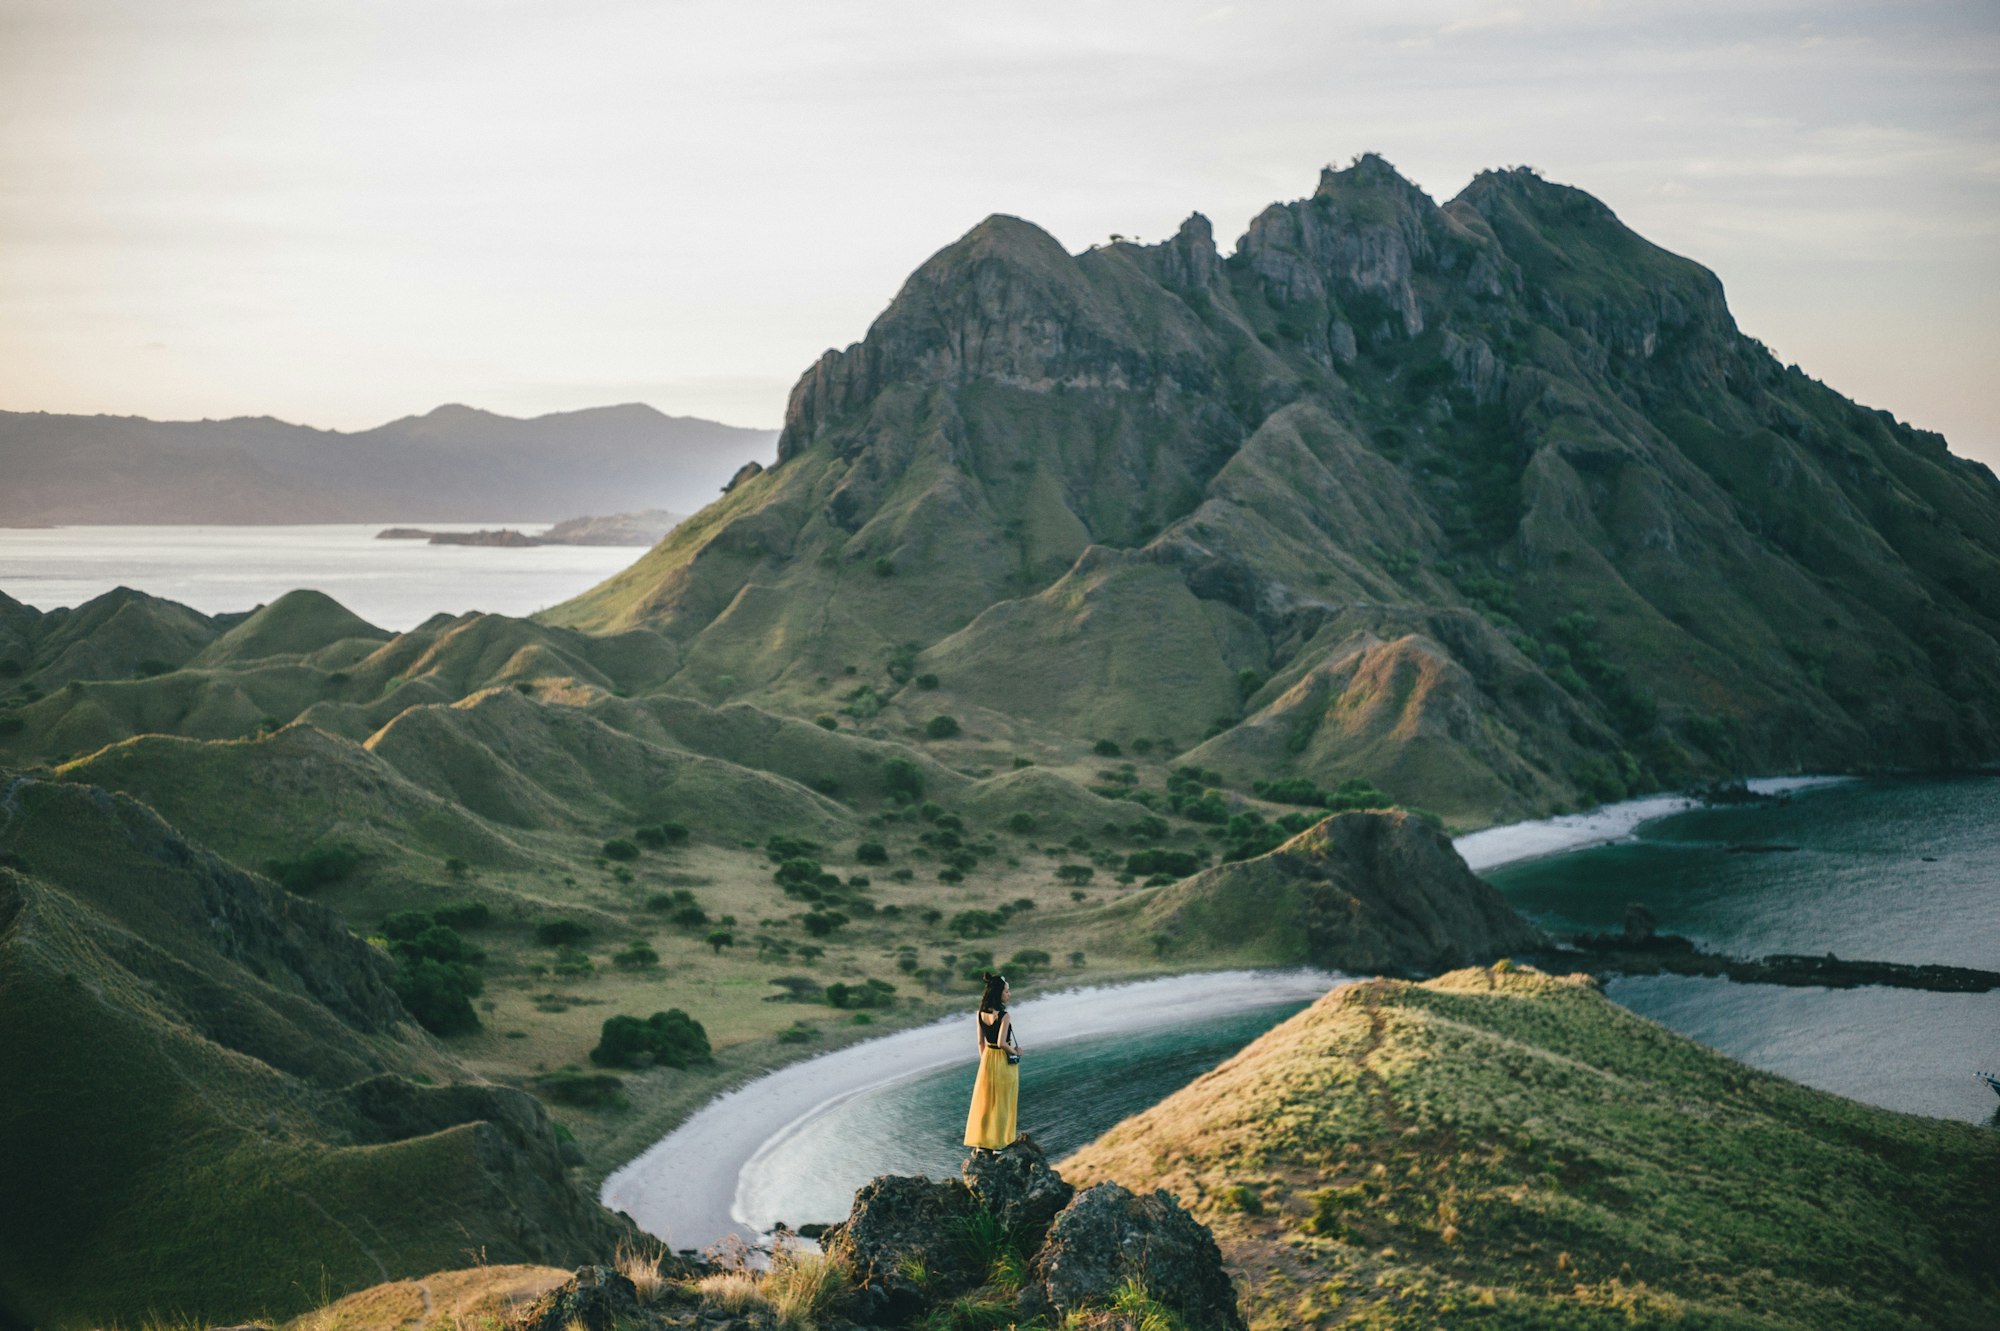 This photo was taken atop Padar Island in Indonesia. I was fortunate enough to be invited by Tourism Indonesia to visit as a state guest to capture their country through my own interpretation of how I view their beautiful country. Obtaining this photo was not an easy feat as we had to speed boat 3 hours from land to the island, followed by a small dinghy bringing us to shore, and a hike up a dirt/rock covered track (kudos to my model for doing so with a dress!) all whilst chasing the sunset light to reach the top.